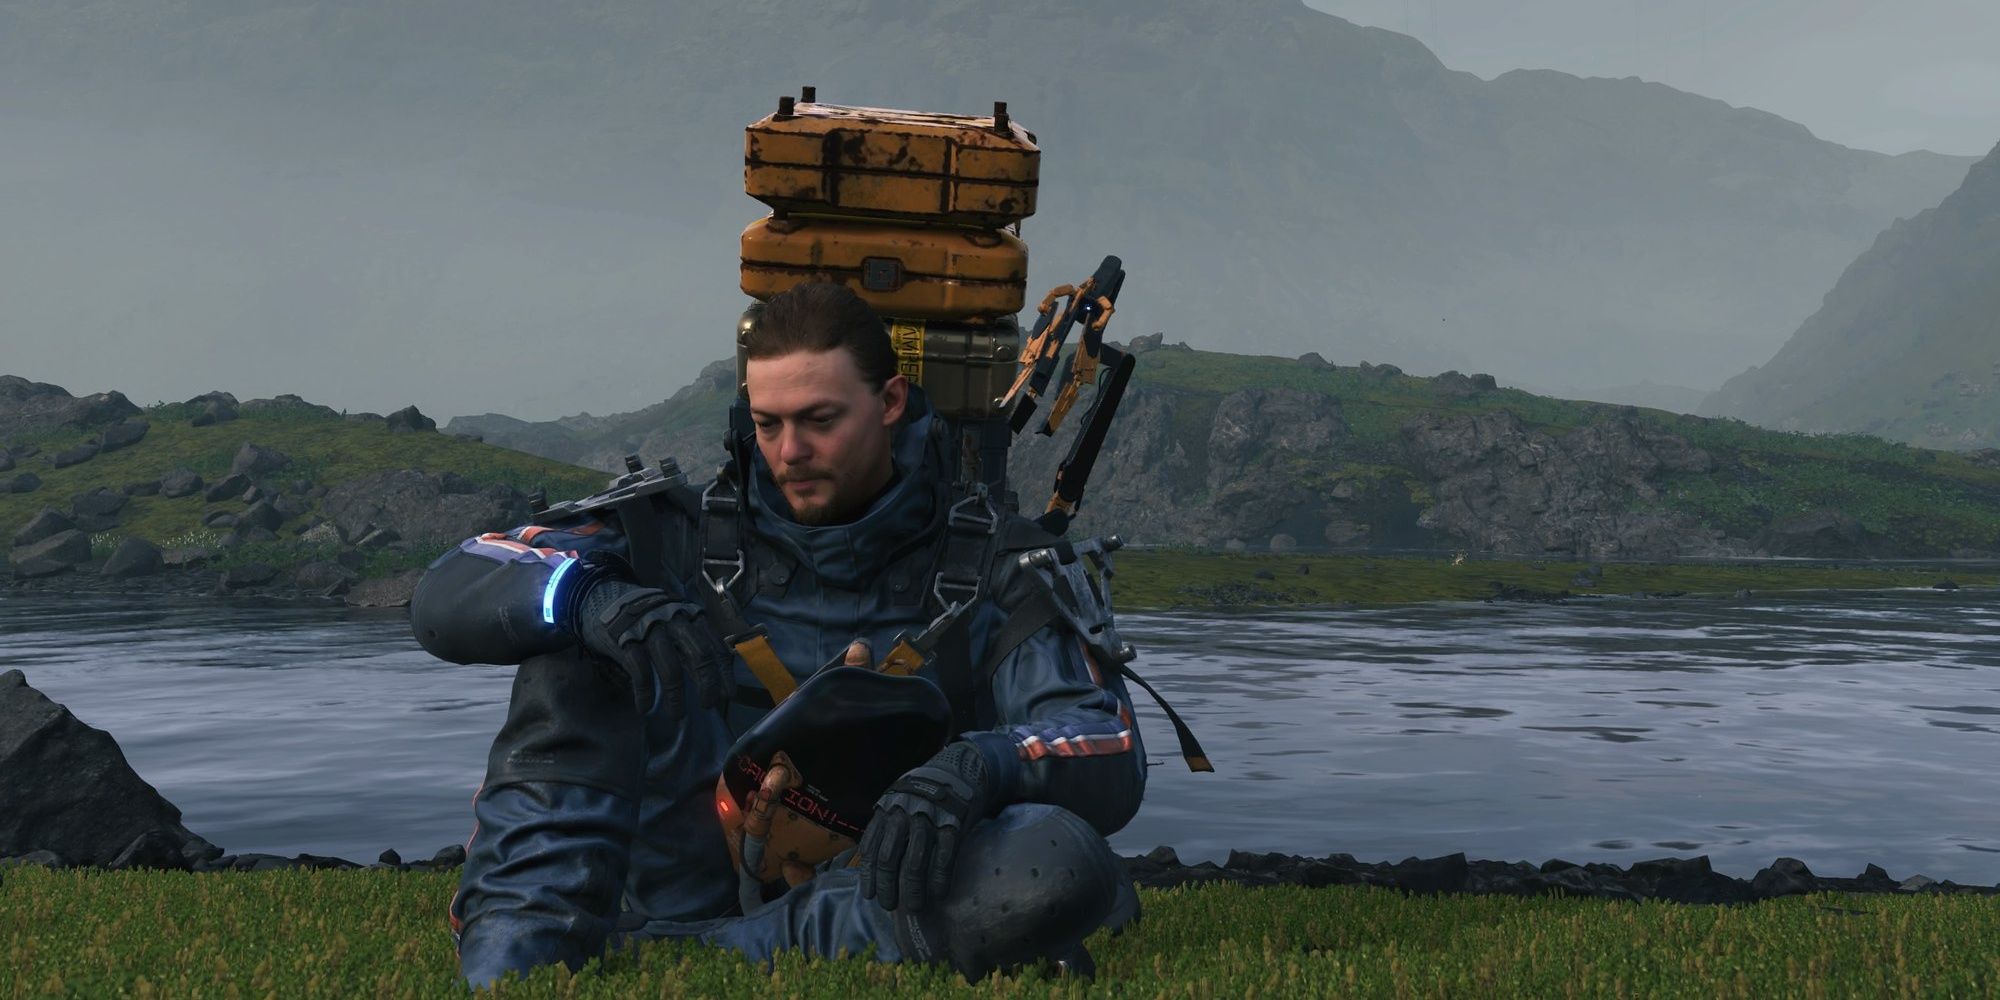 Death Stranding Sam Resting with cargo on his back and a river and misty mountains in the background